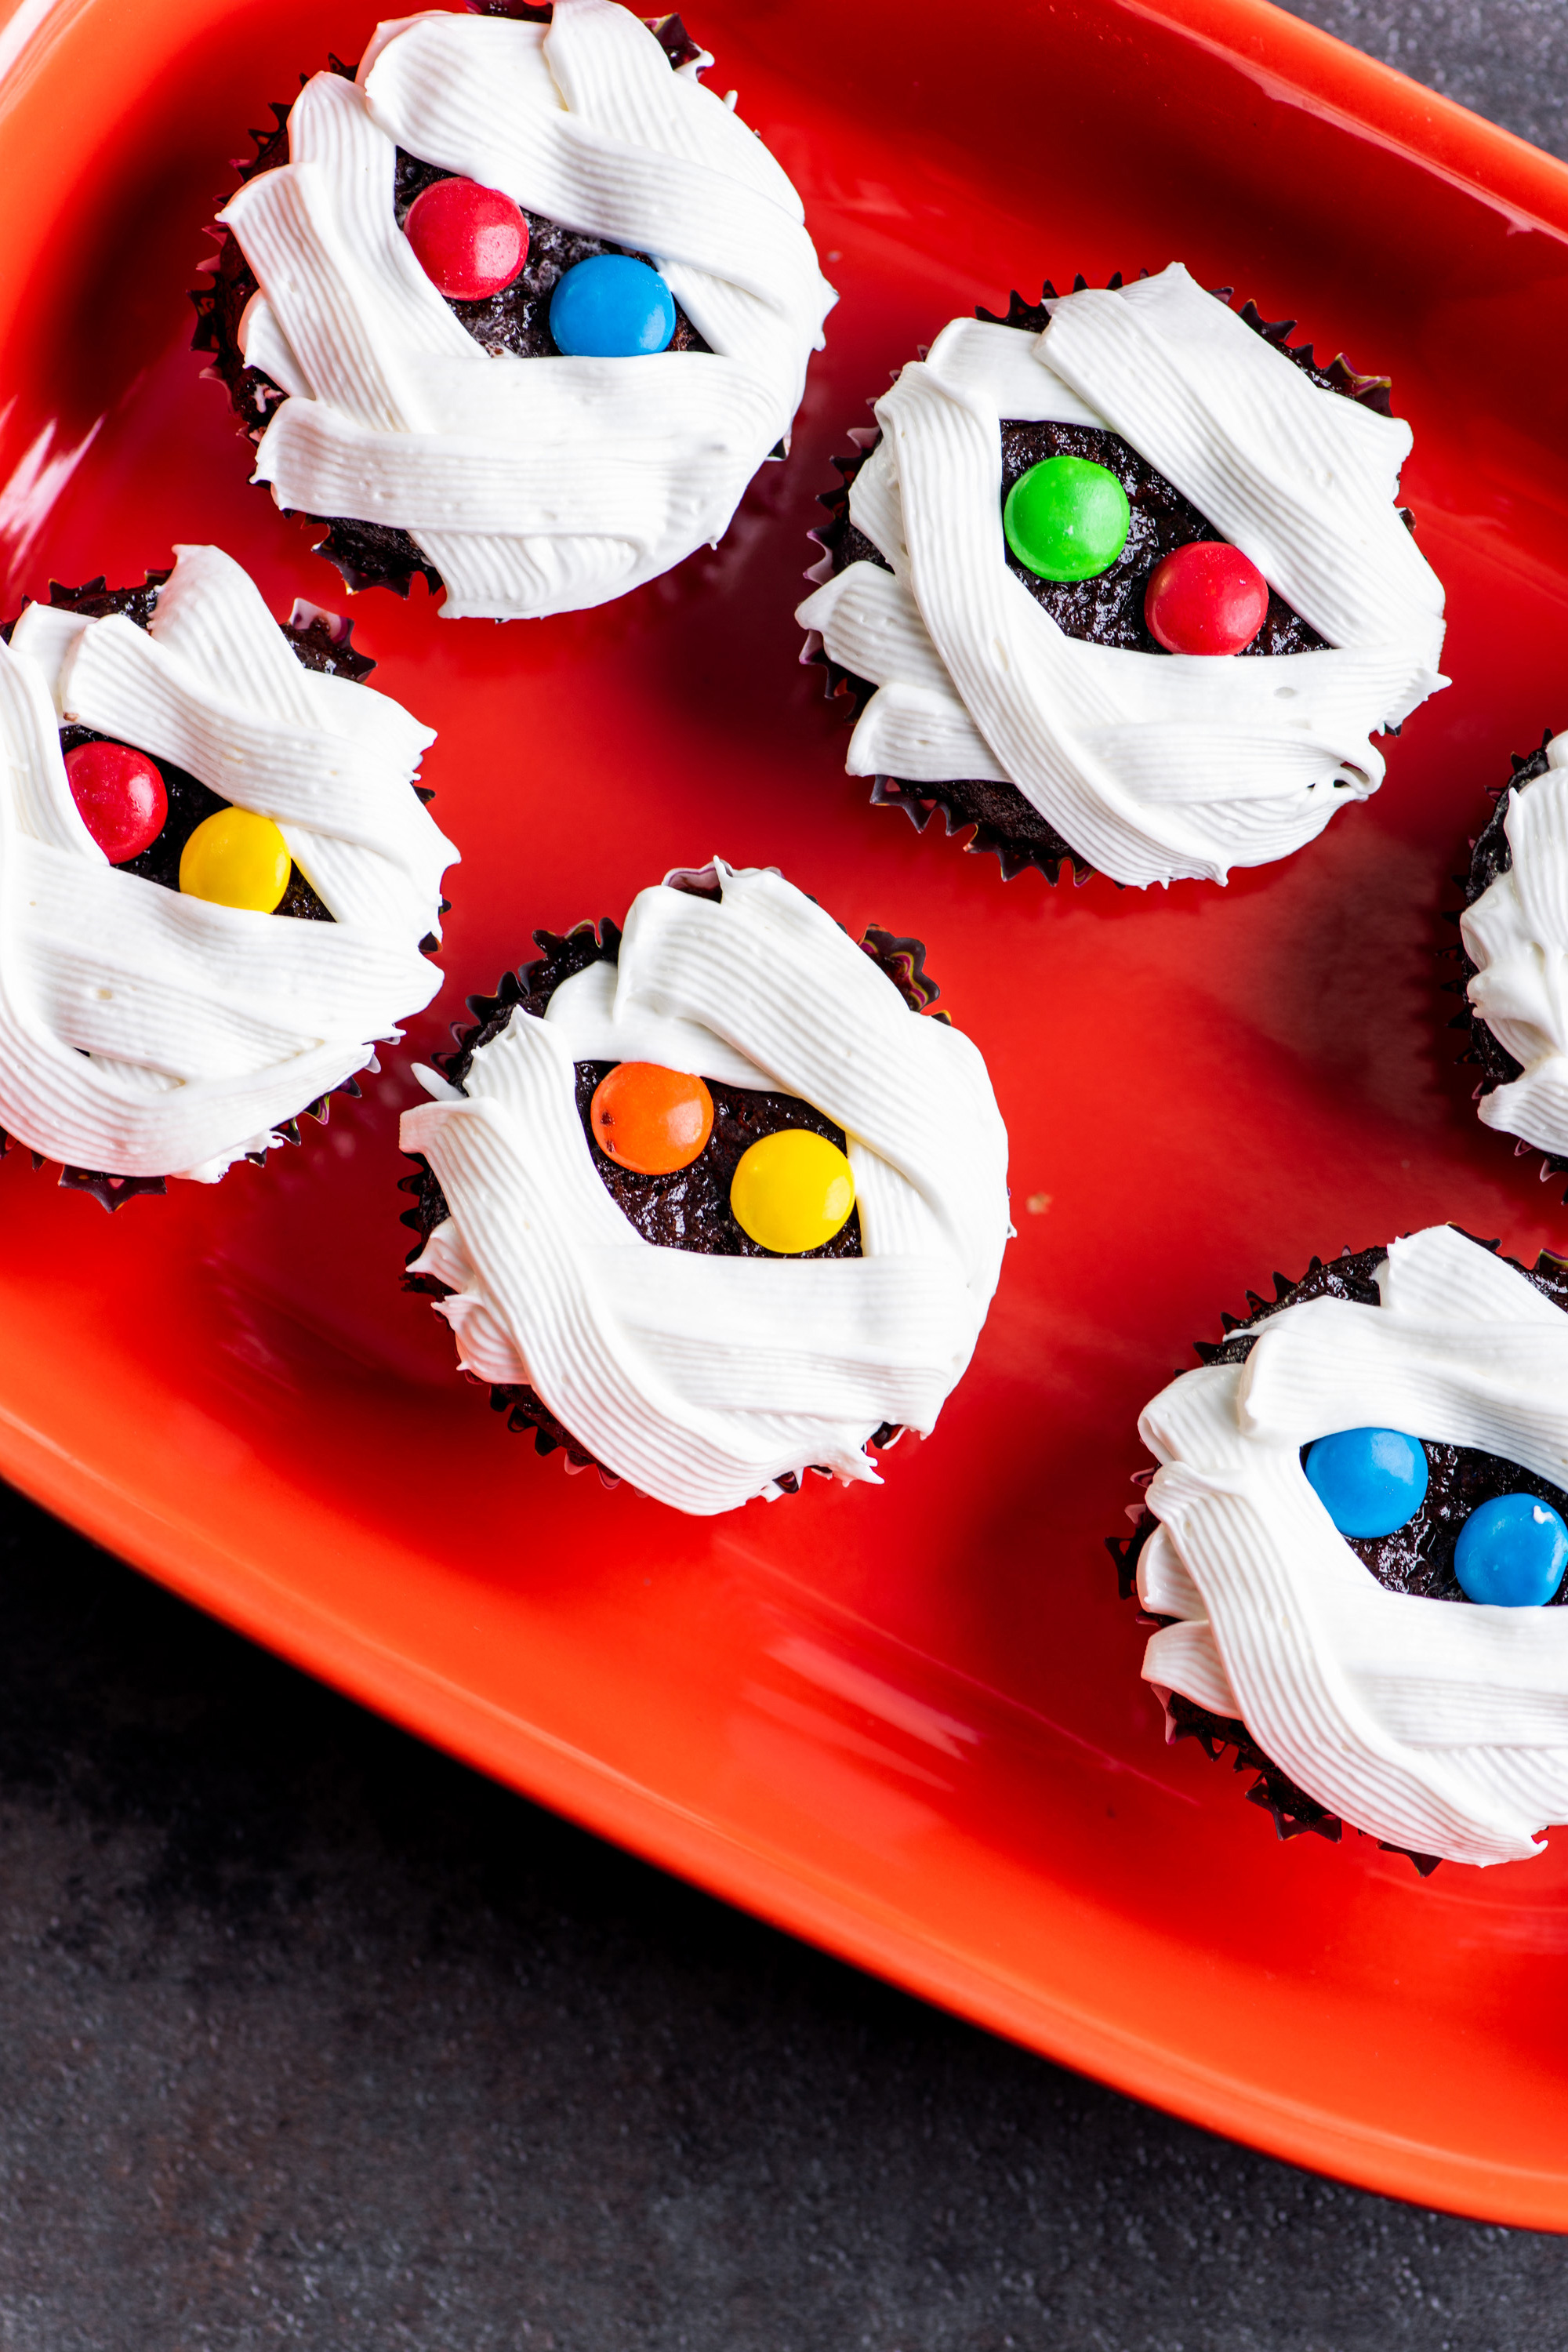 Cupcakes with white frosting and candies decorated to look like mummies.